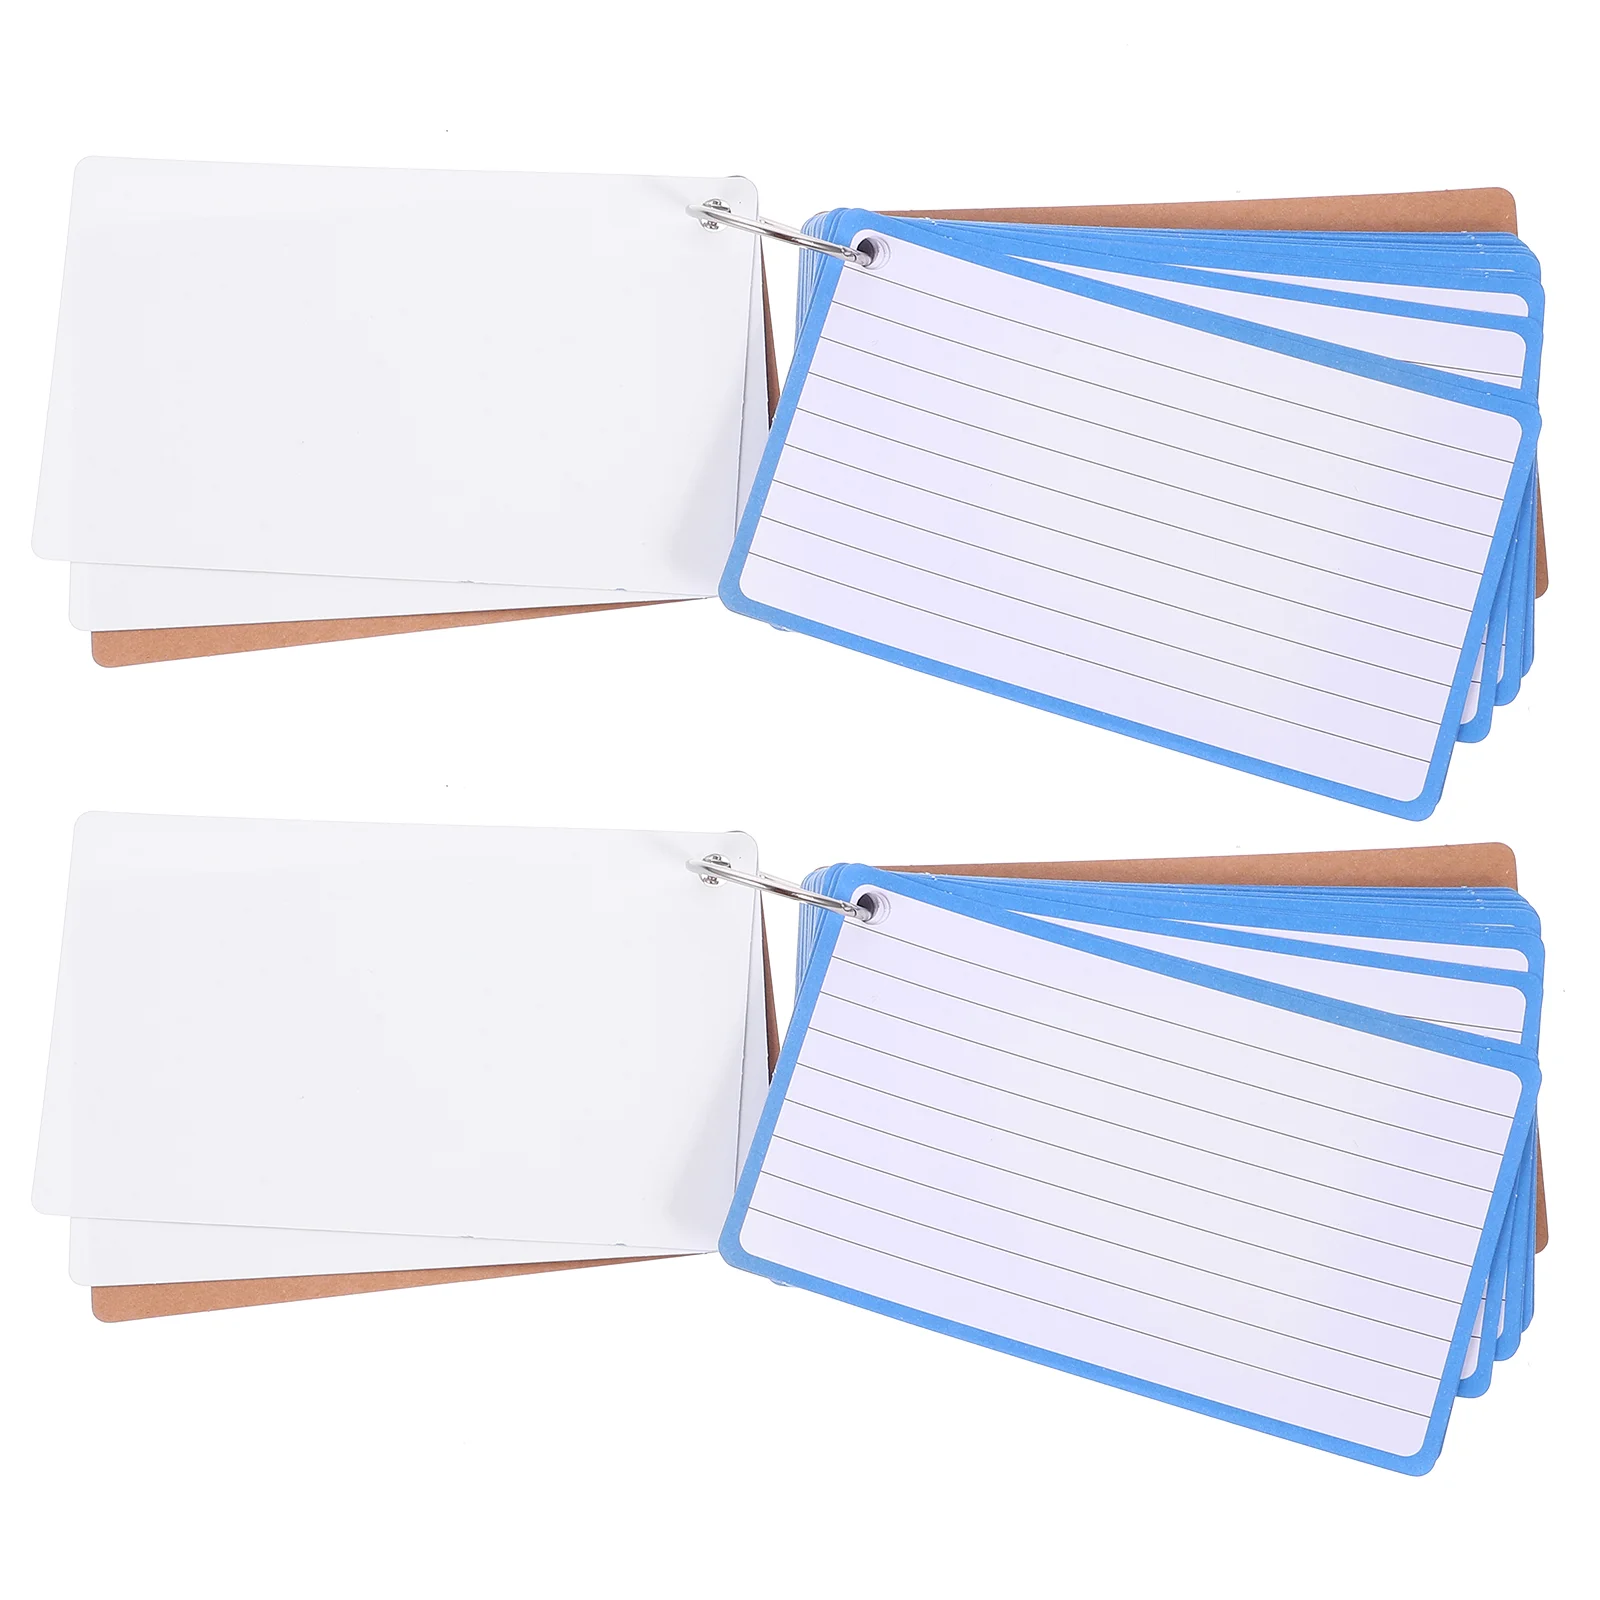 2 Books of Memo Blank Cards Index Cards Lined Cards Diy Graffiti Cards Colored Index Card 2 books of memo blank cards index cards lined cards diy graffiti cards colored index card